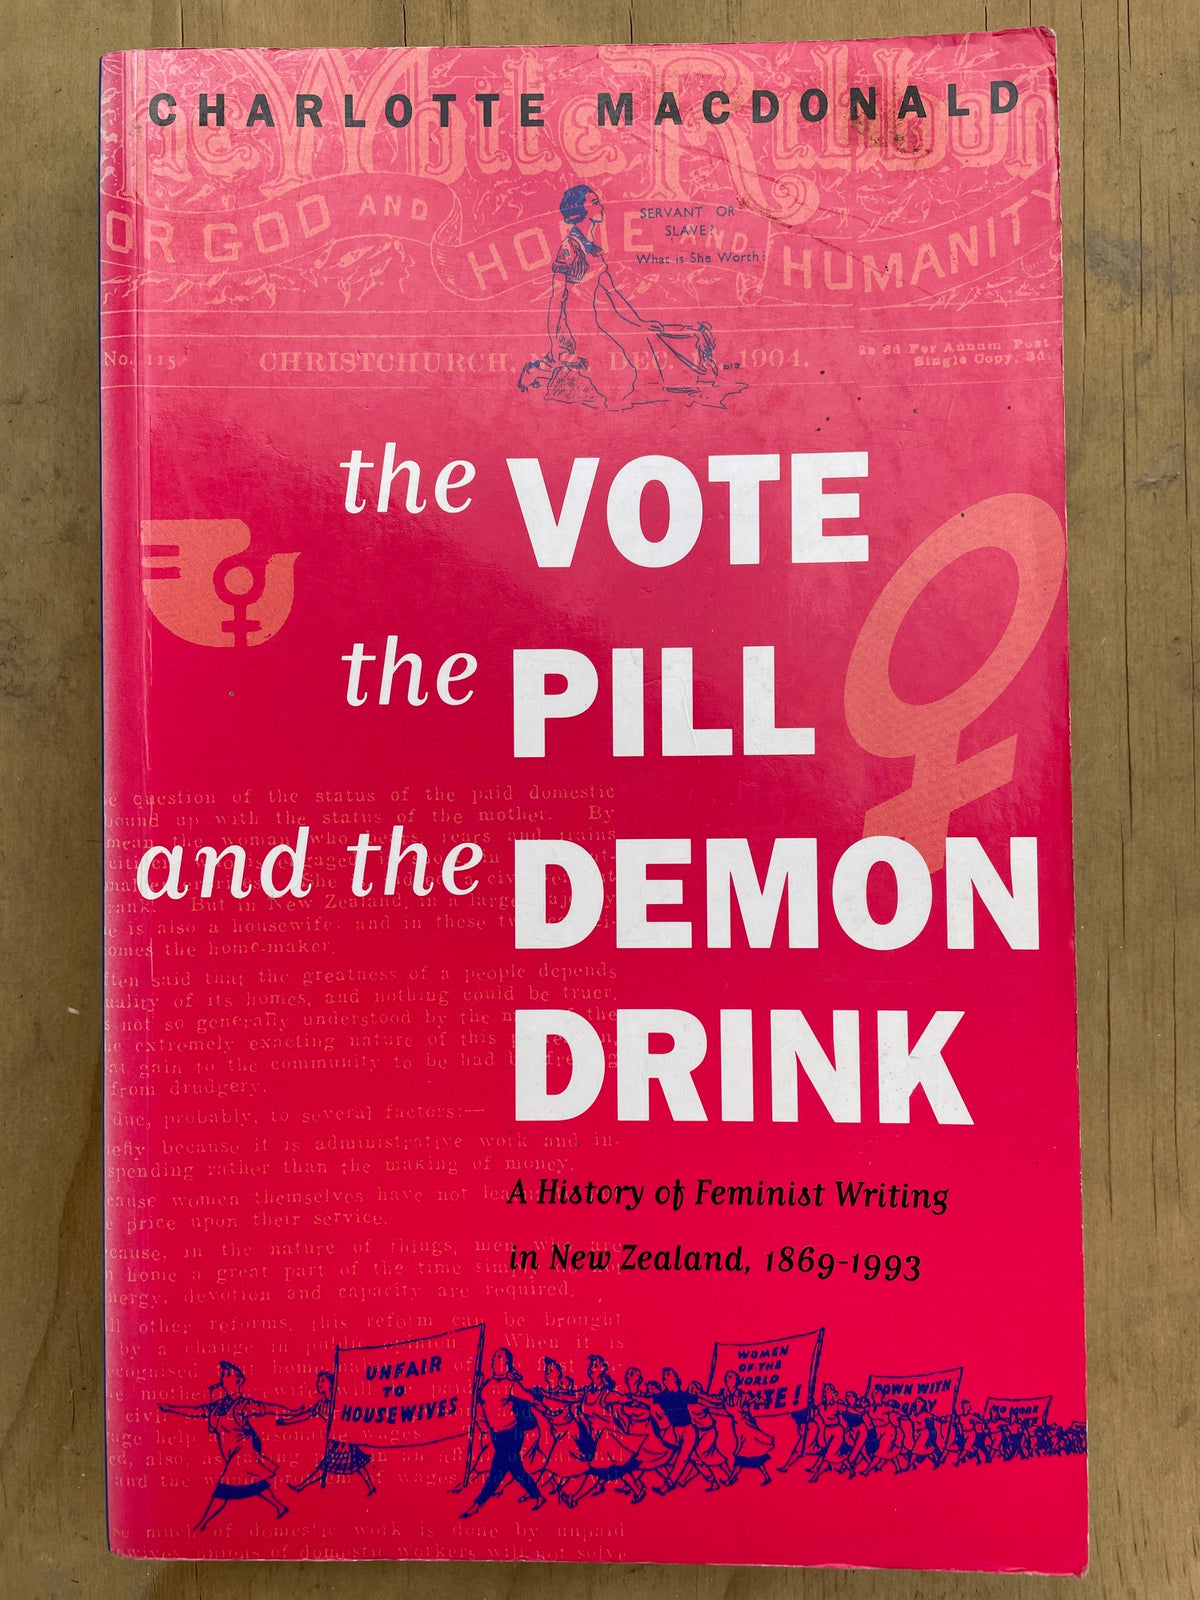 The Vote, the Pill, and the Demon Drink: A History of Feminist Writing in New Zealand, 1869-1993 - Charlotte MacDonald